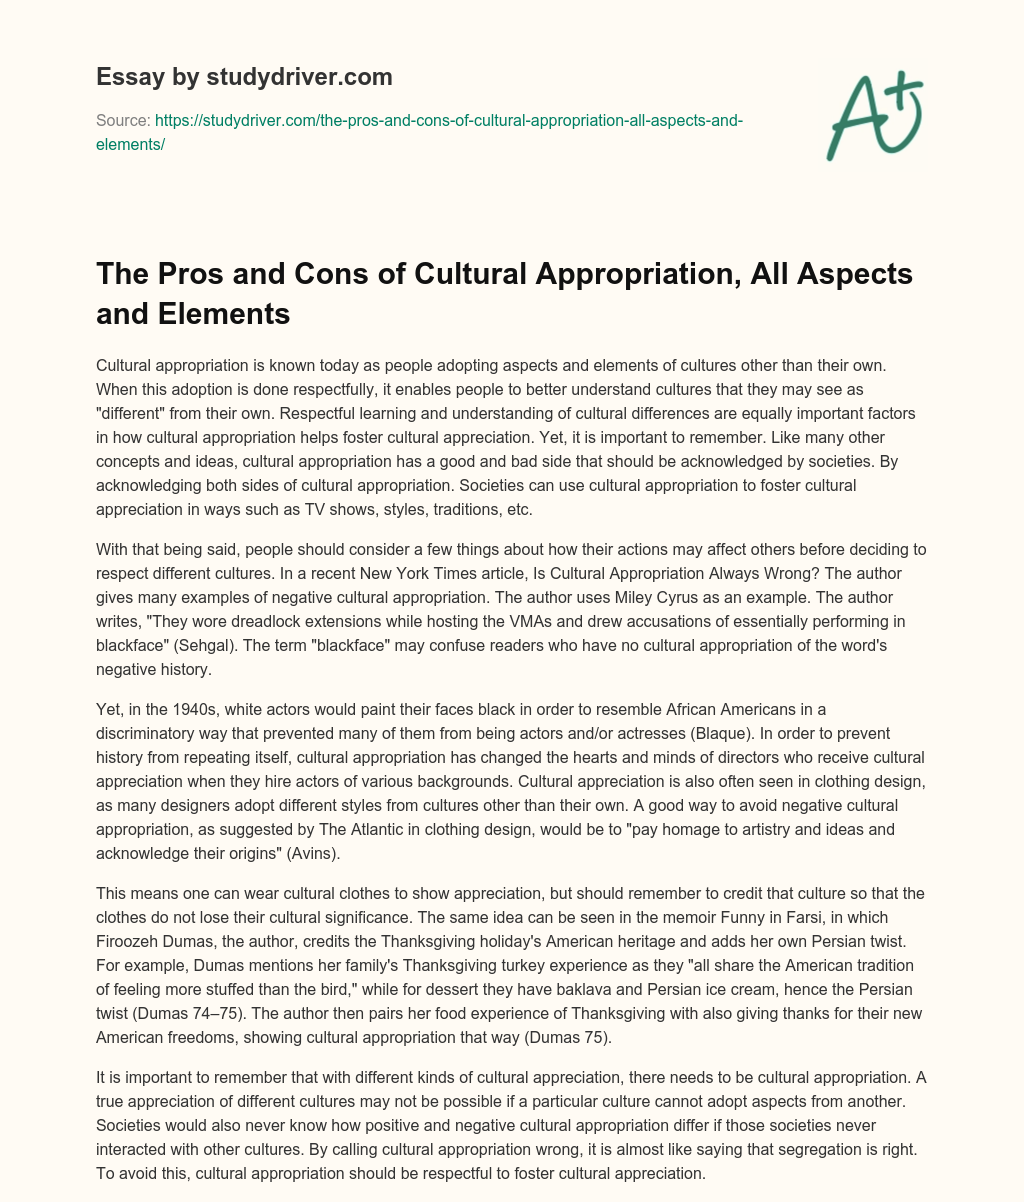 The Pros and Cons of Cultural Appropriation, all Aspects and Elements essay